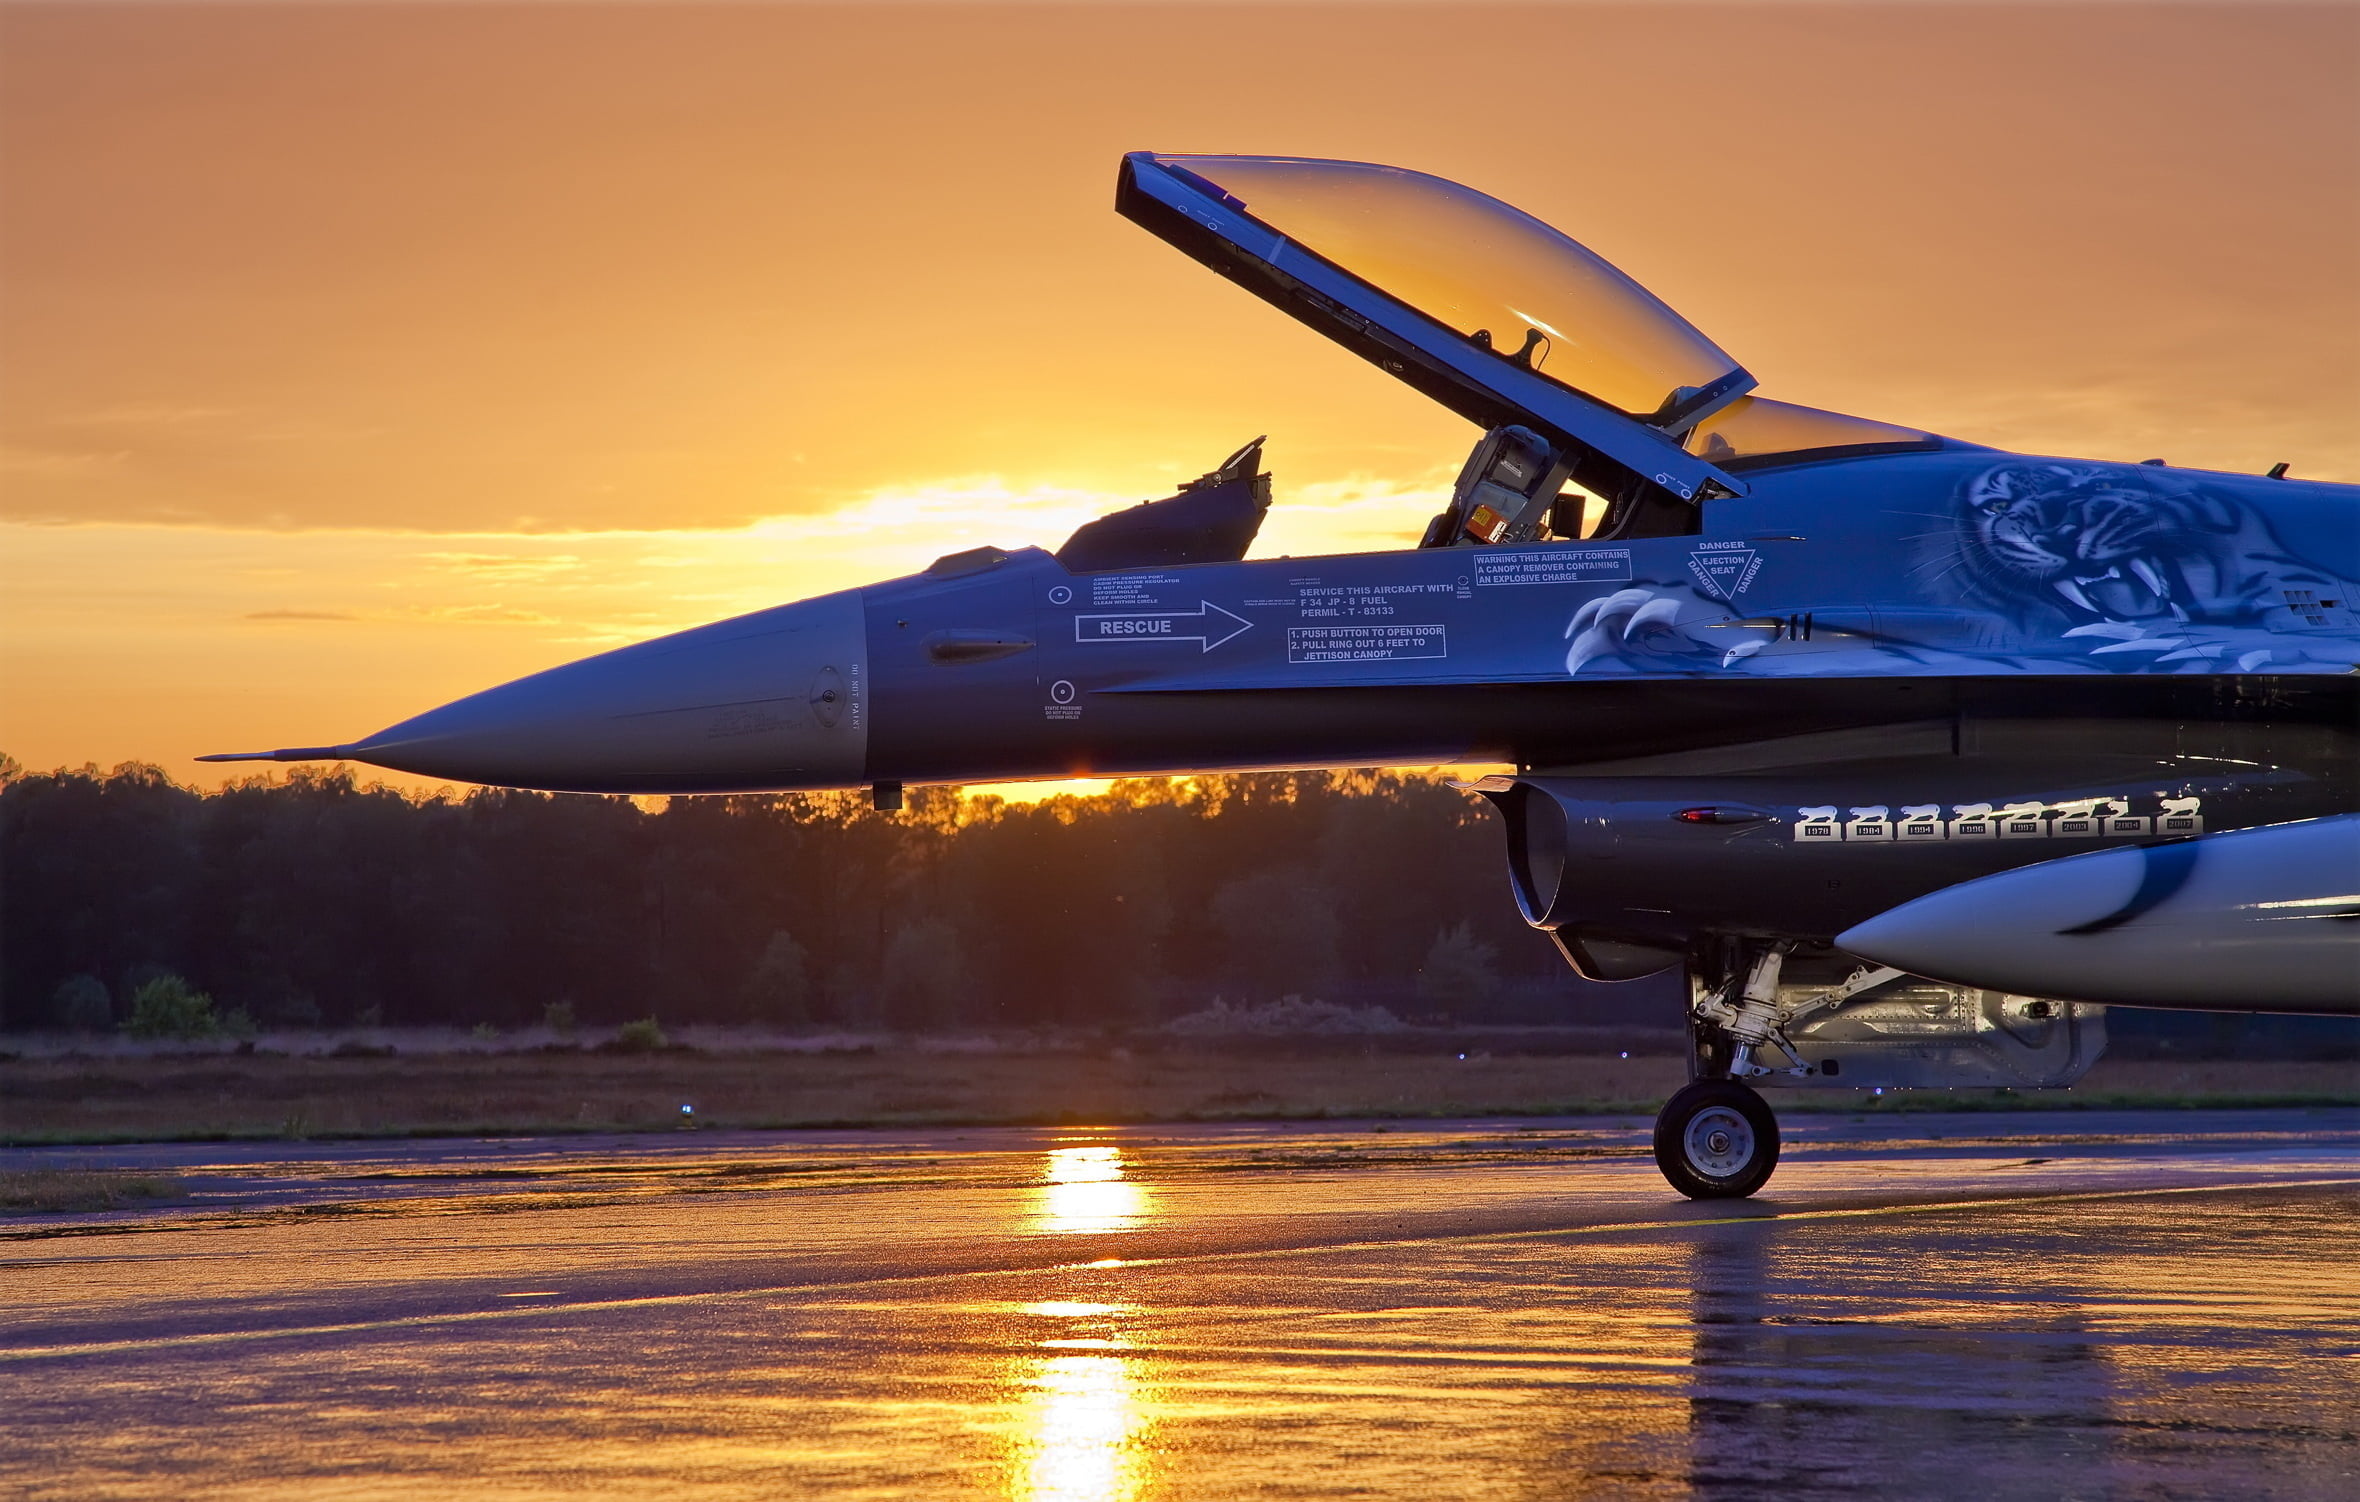 gray fighter jet, Sunset, The sky, Clouds, The evening, The plane